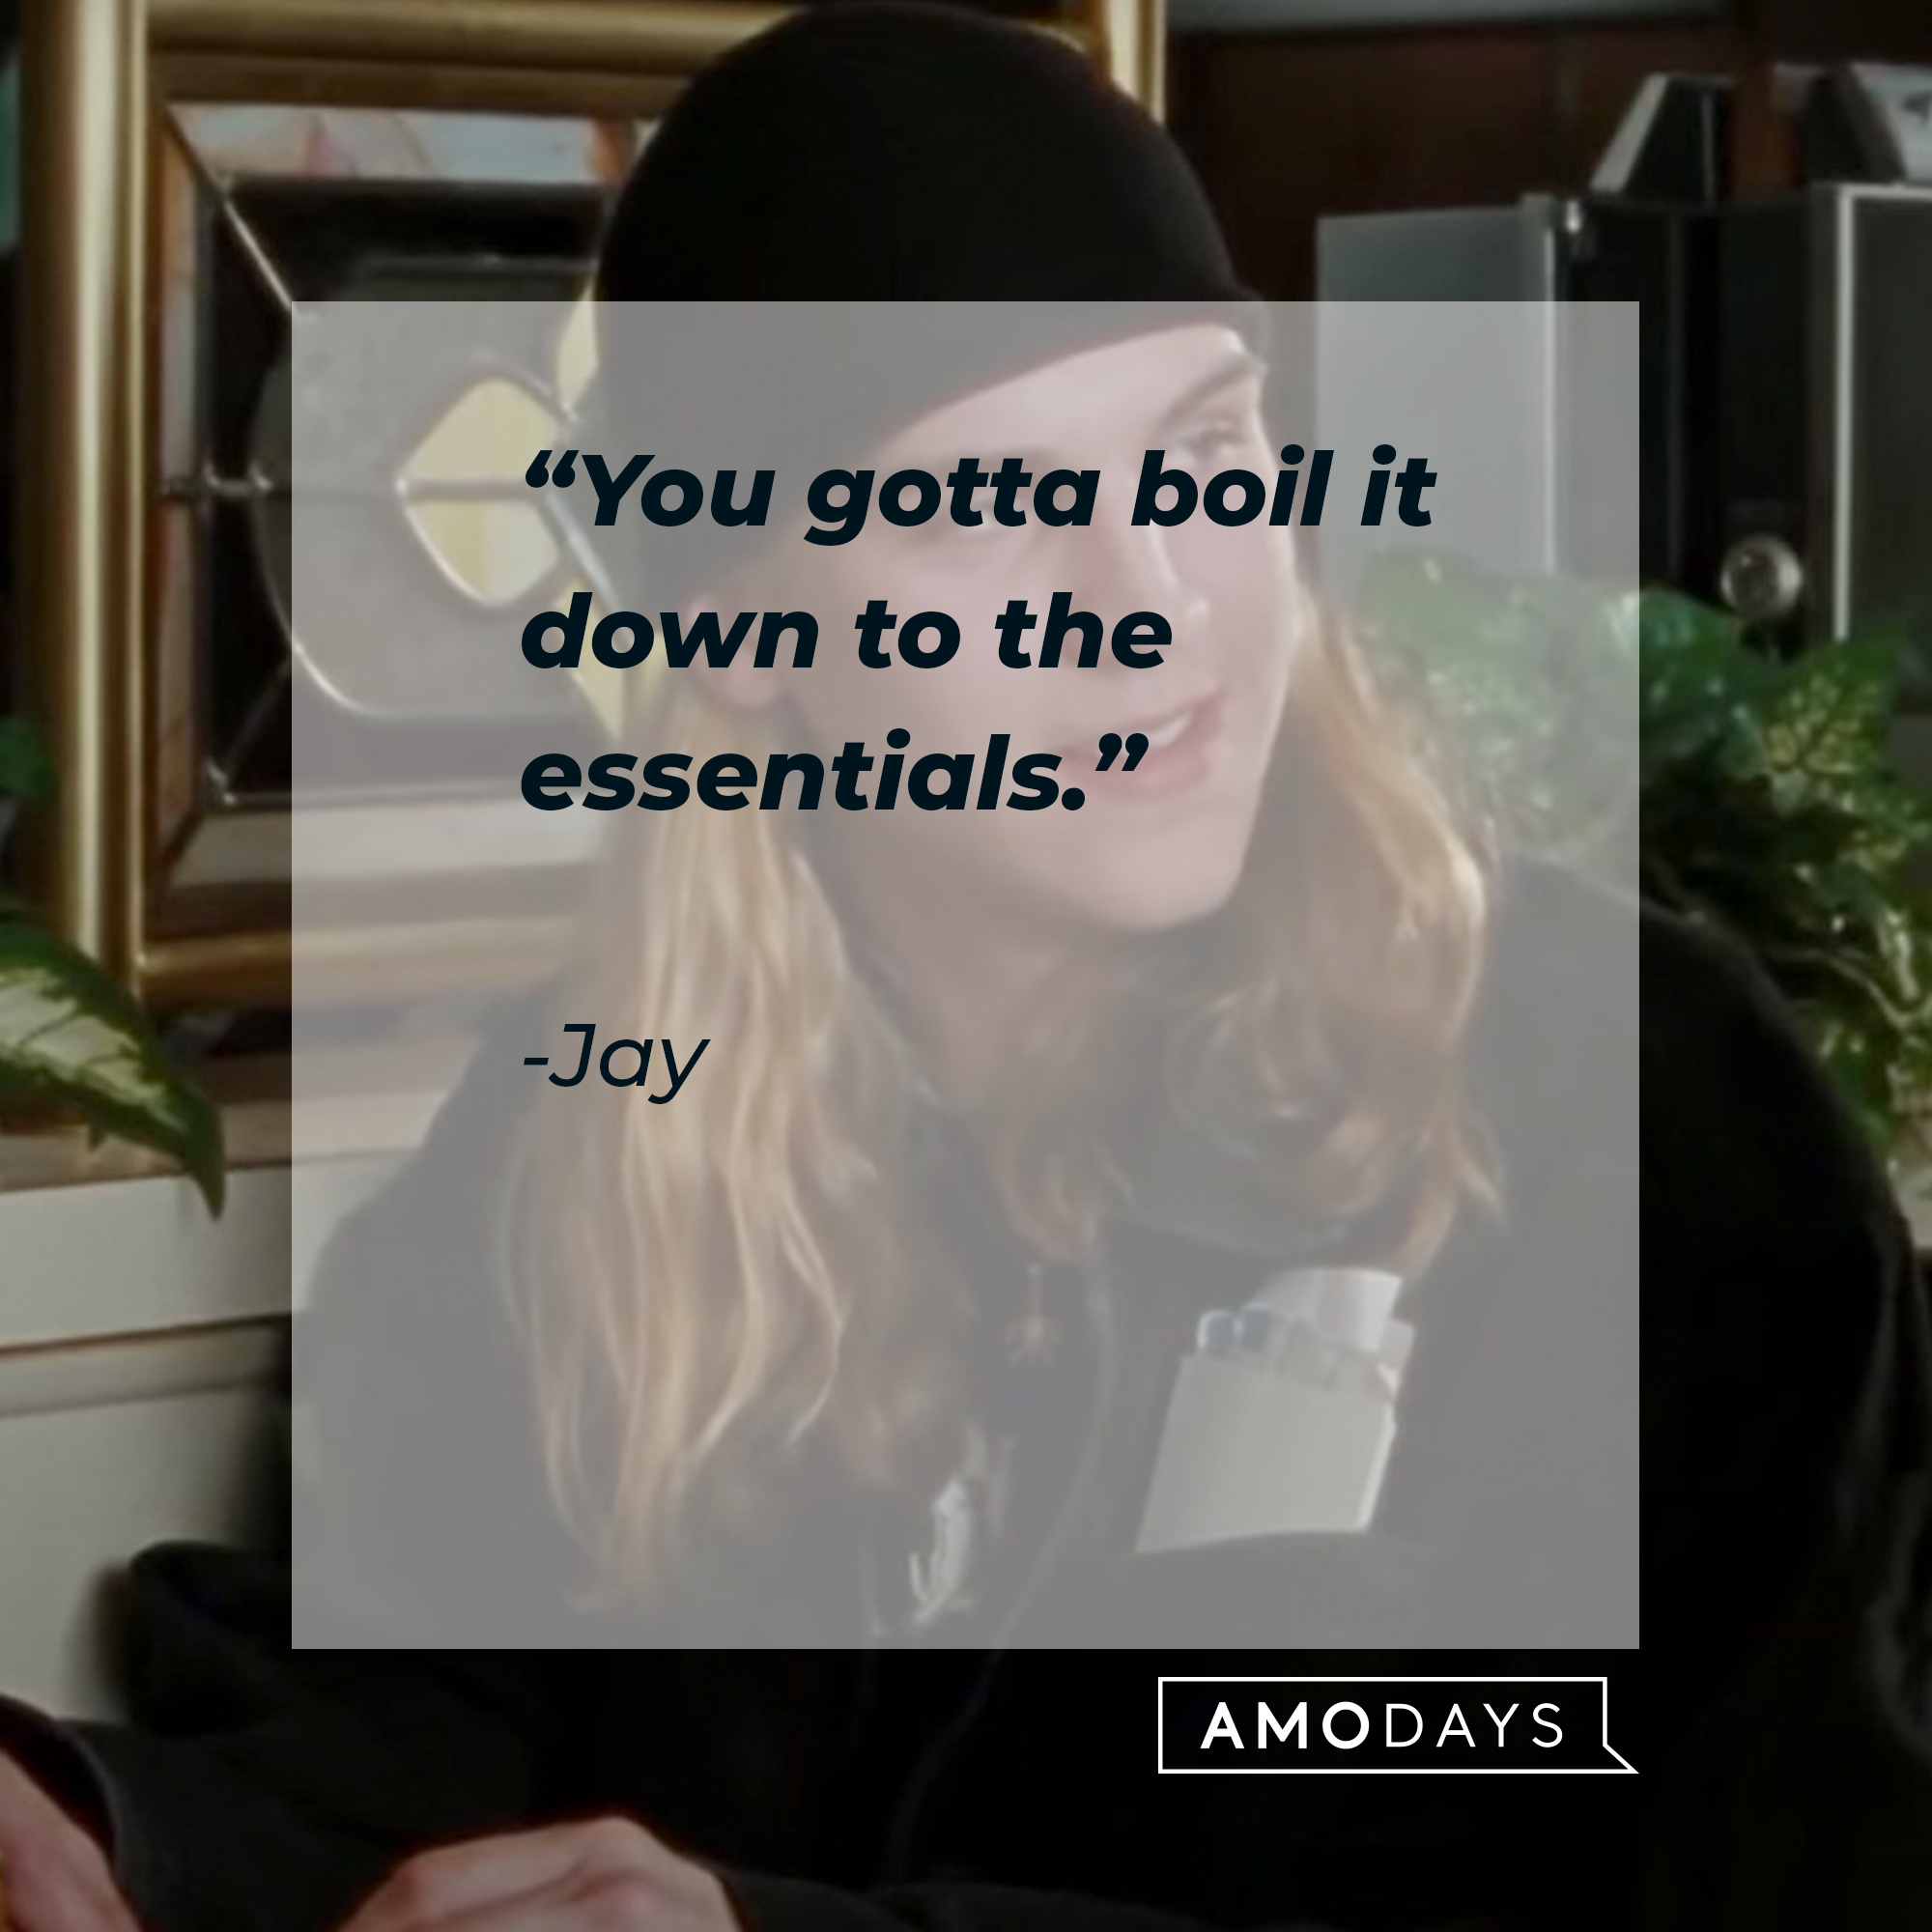 Jay, with his quote: “You gotta boil it down to the essentials.” | Source: facebook.com/ChasingAmyMovie